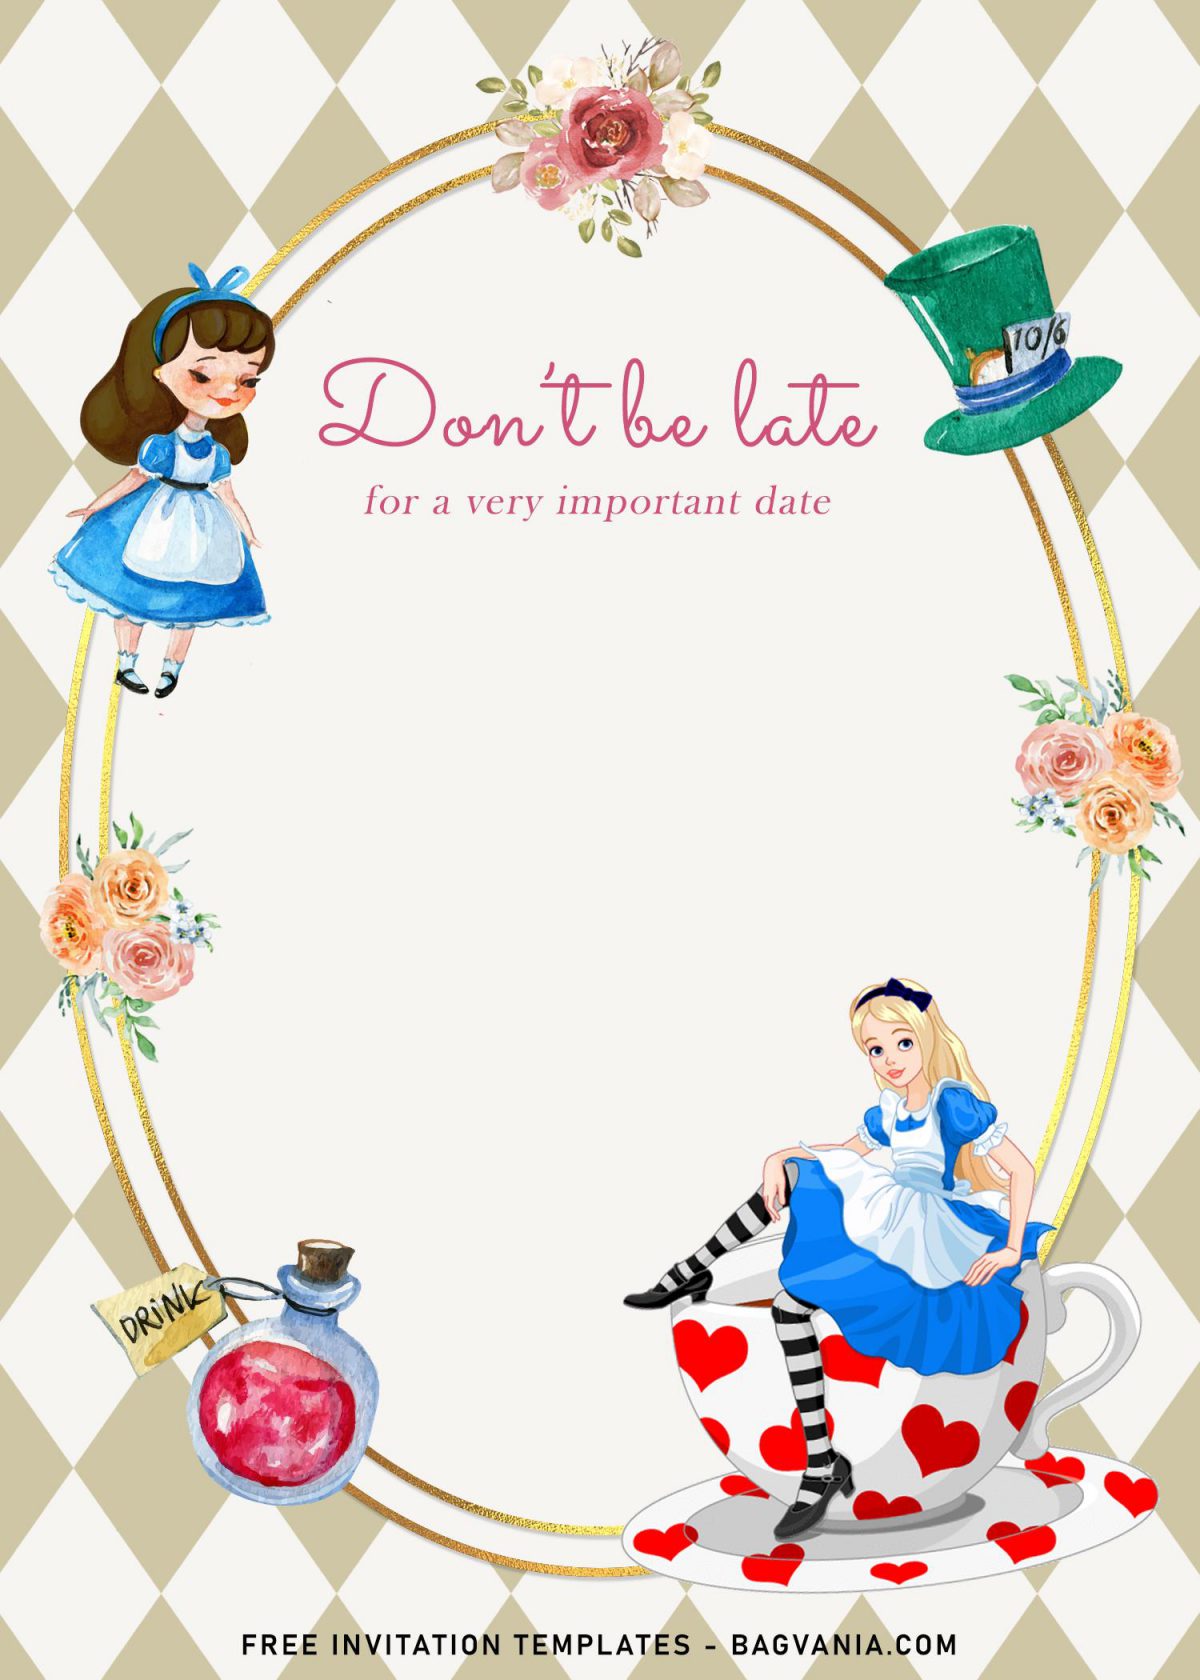 8+ Vintage Alice In Wonderland Birthday Invitation Templates and has cute Alice sitting on a cup